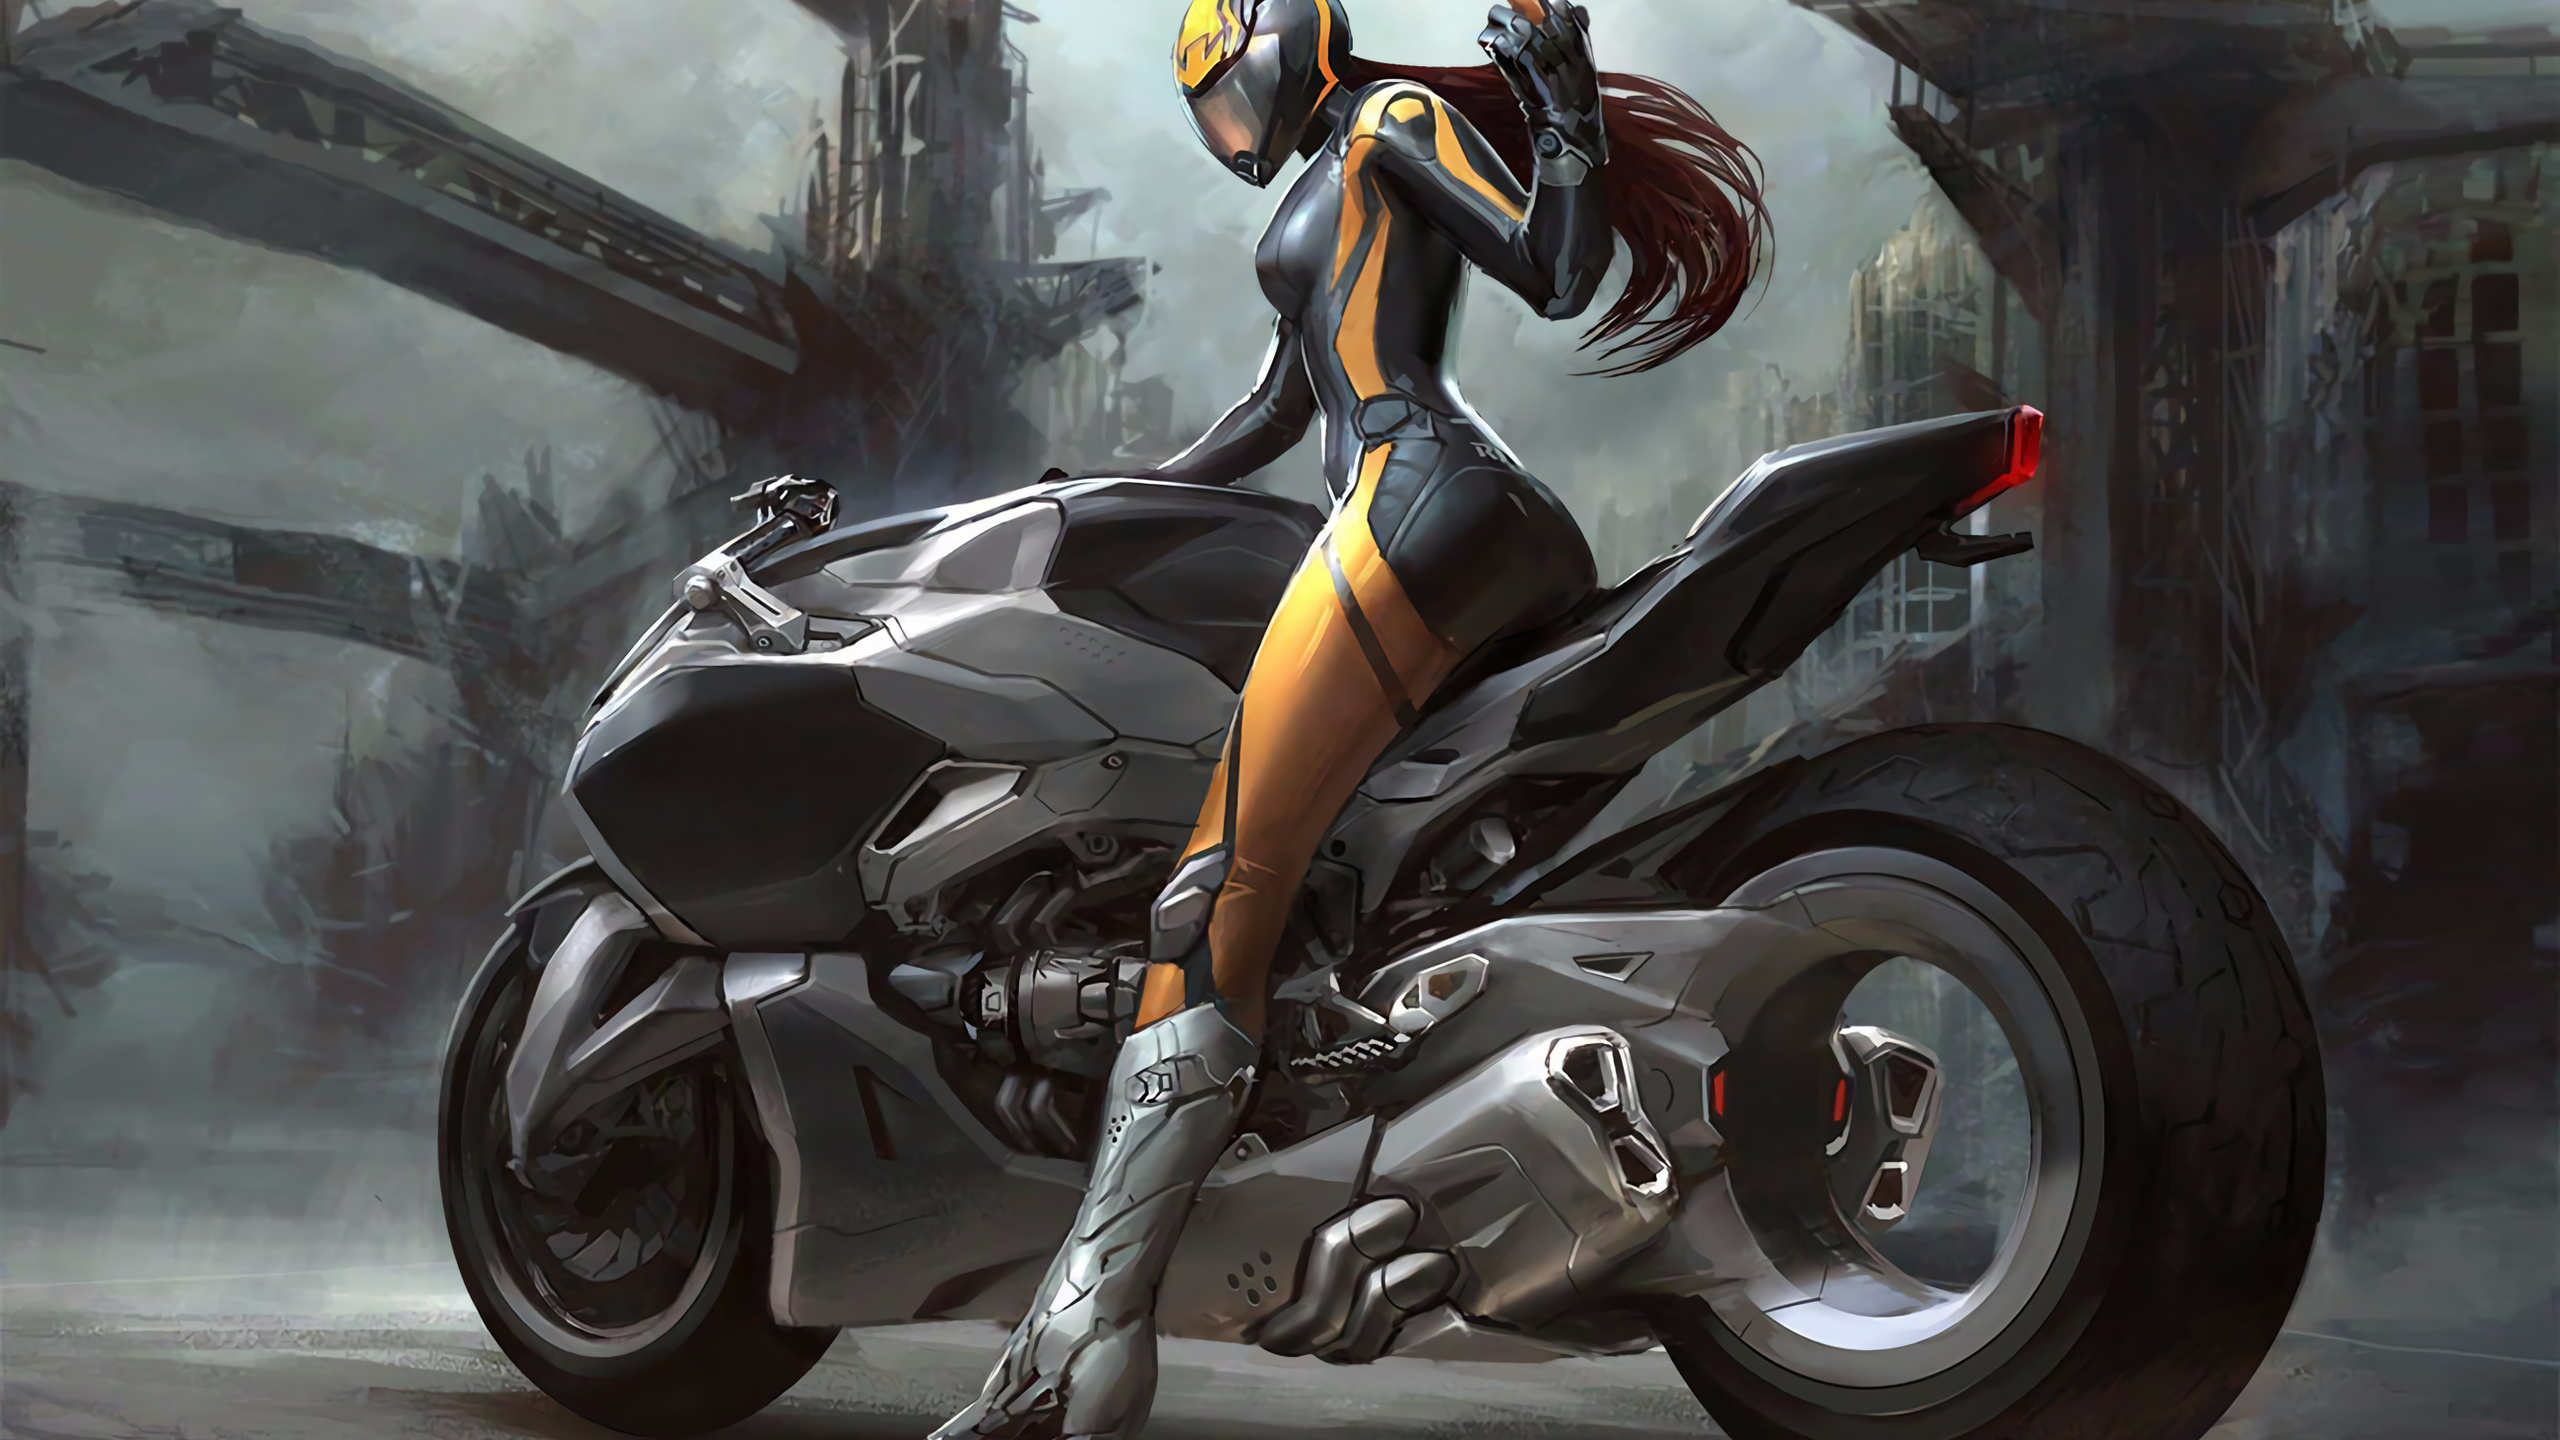 tracer, overwatch, game, girl, anime, brunette, motorcycle, road